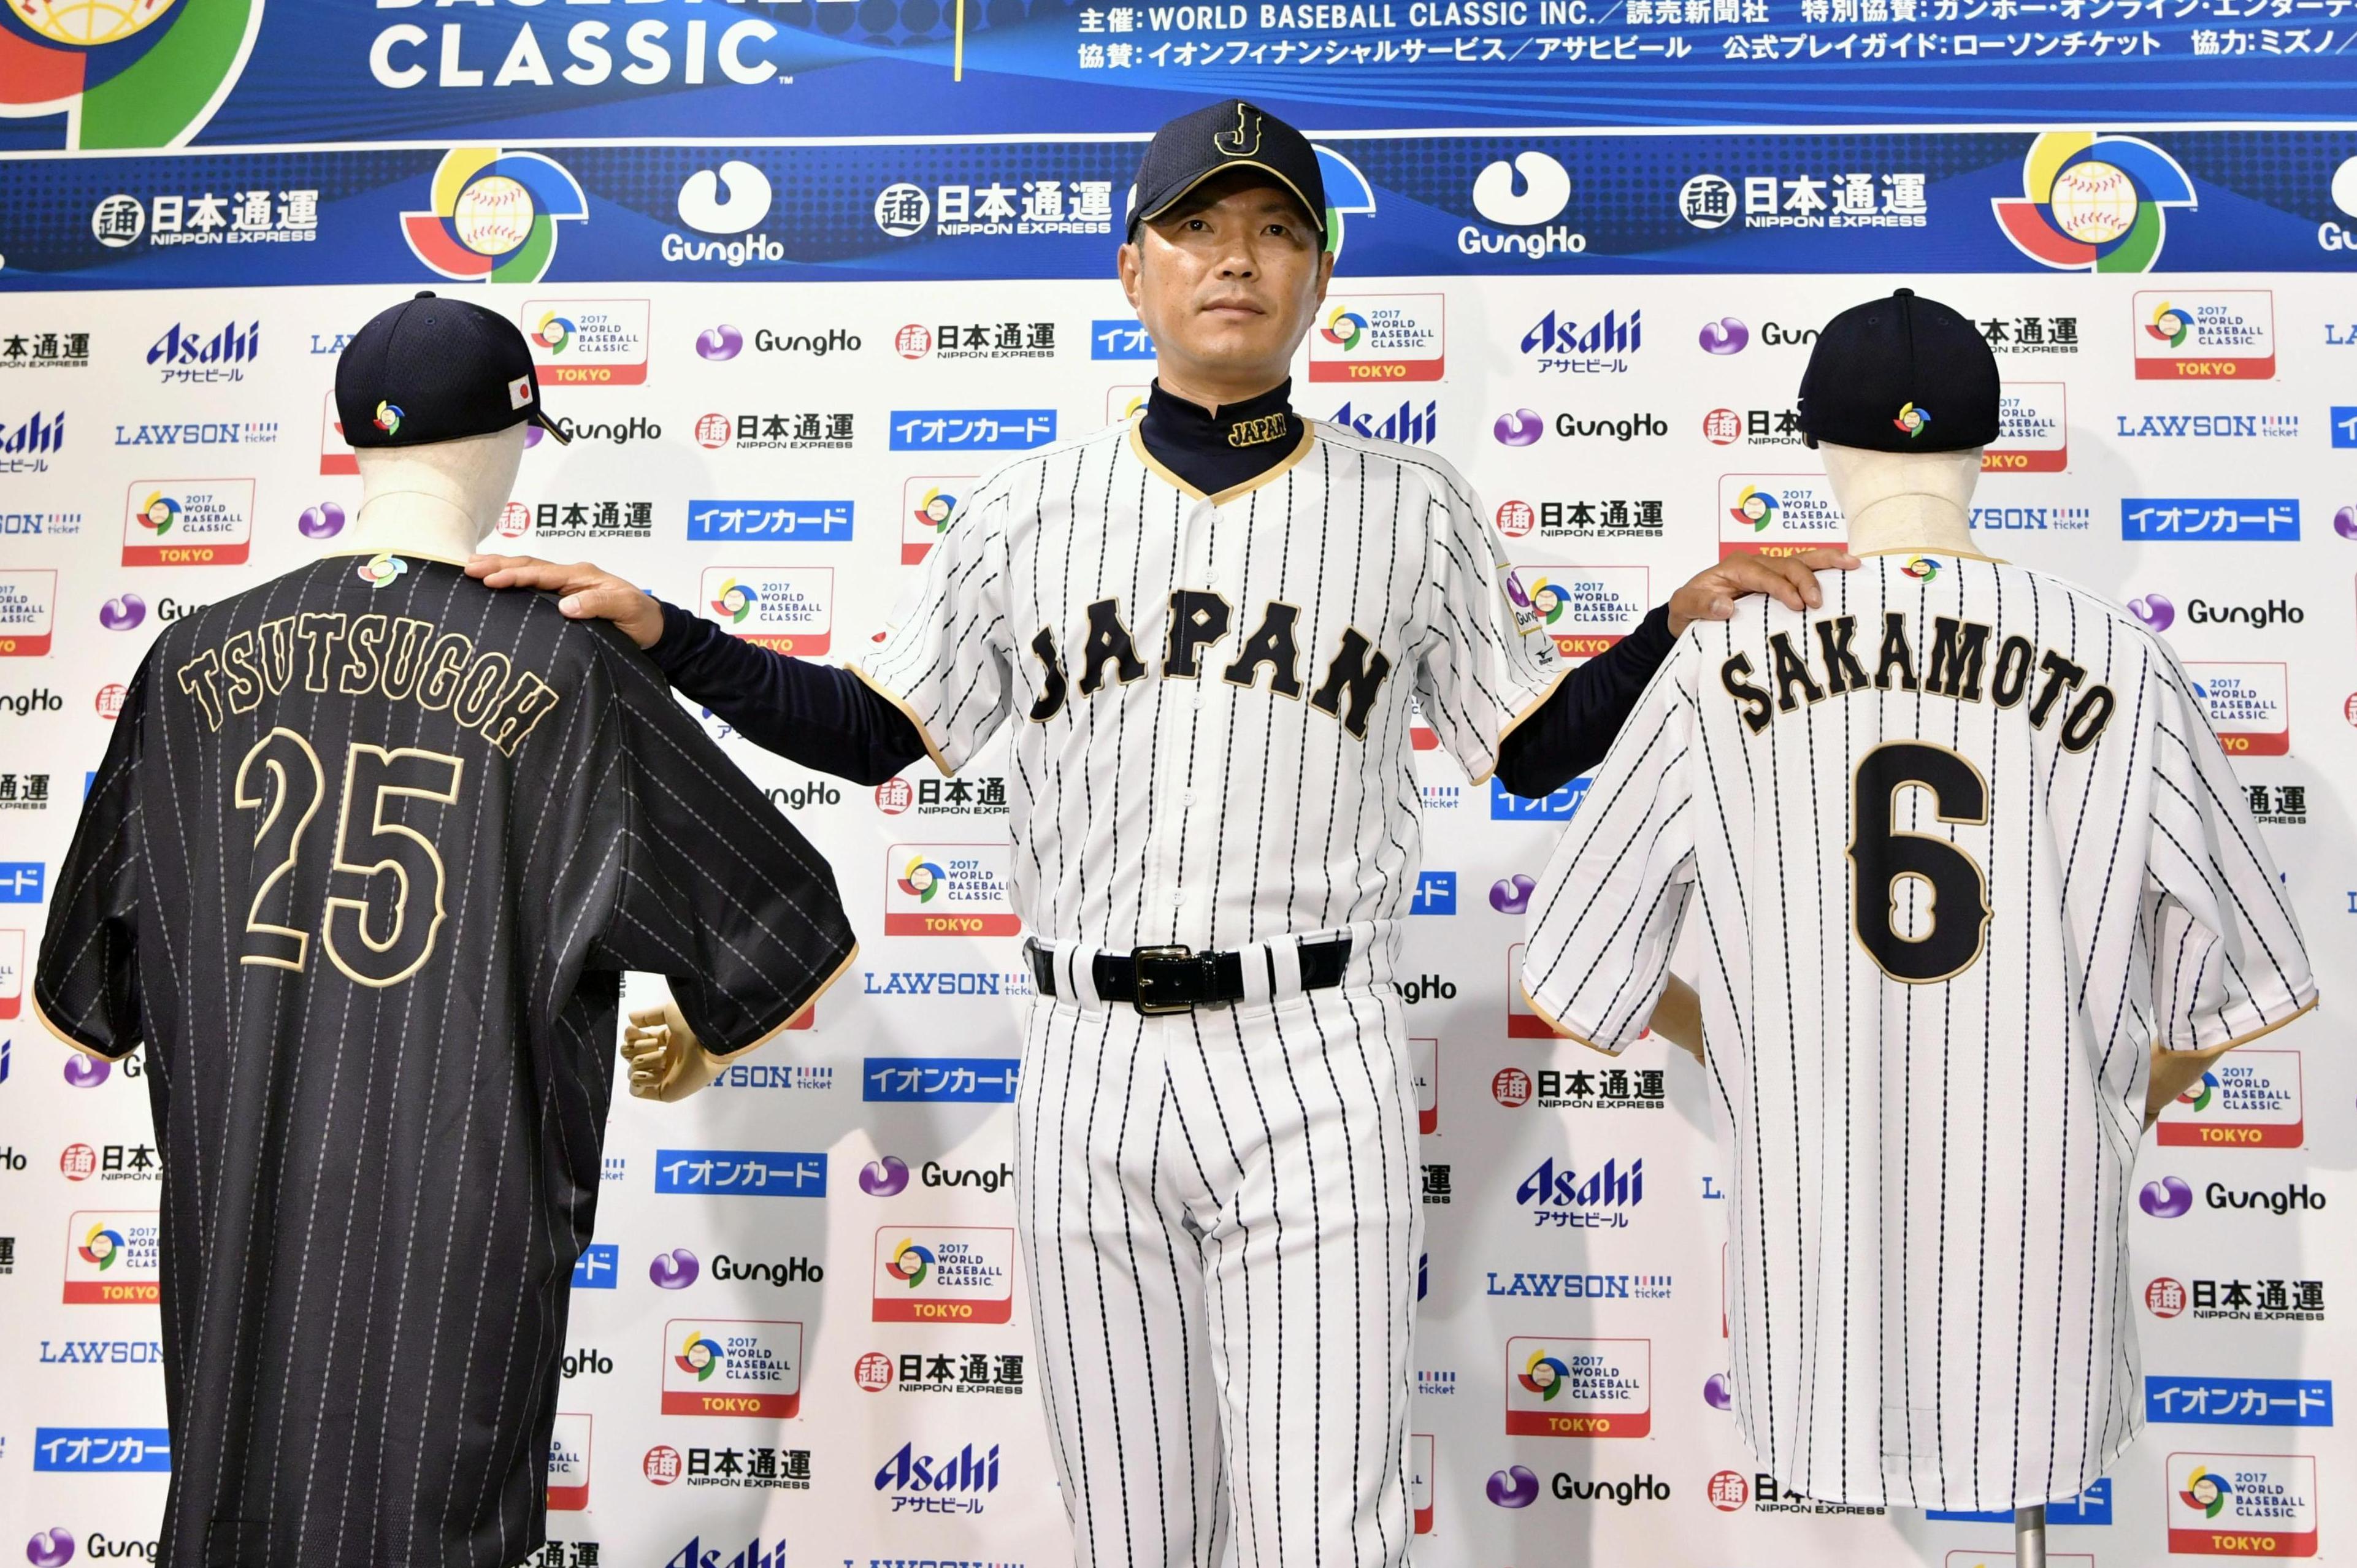 What if…Team Japan's 2026 WBC uniforms were inspired by Japanese cherry  trees 👀🍒